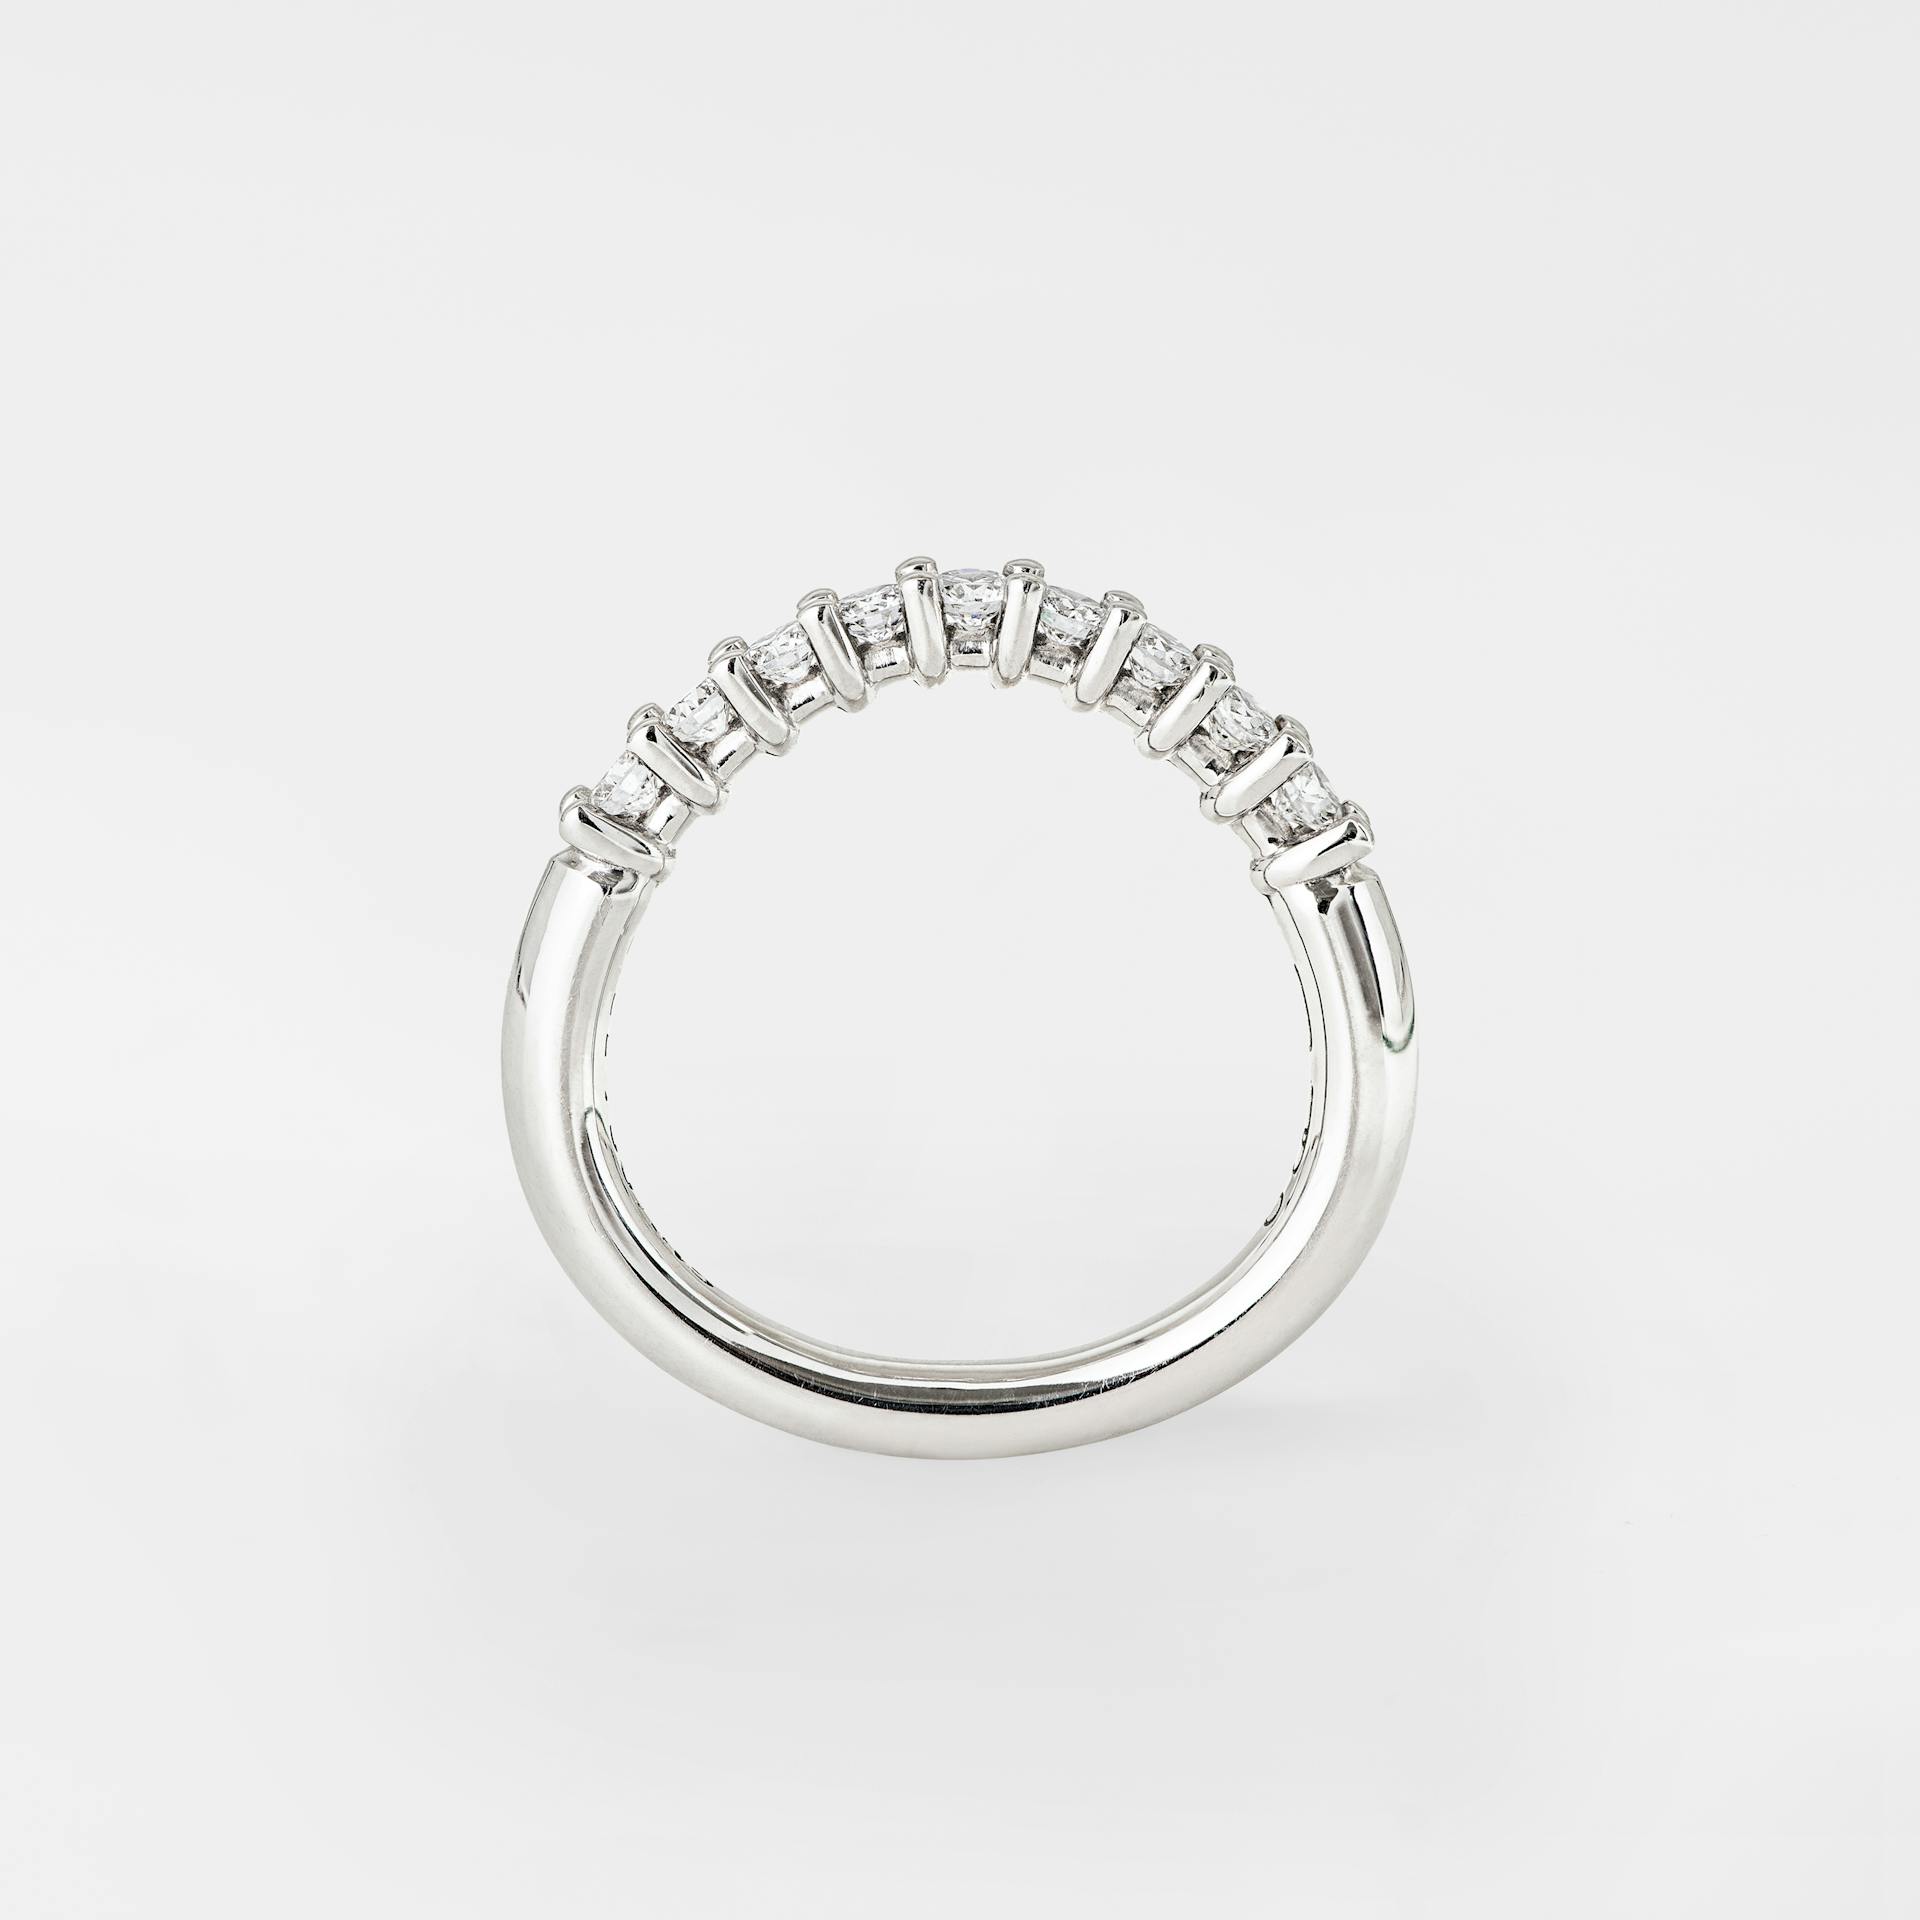 Celebration Alliance Ring in Polished White Gold with Diamonds  |  Ole Lynggaard Copenhagen 